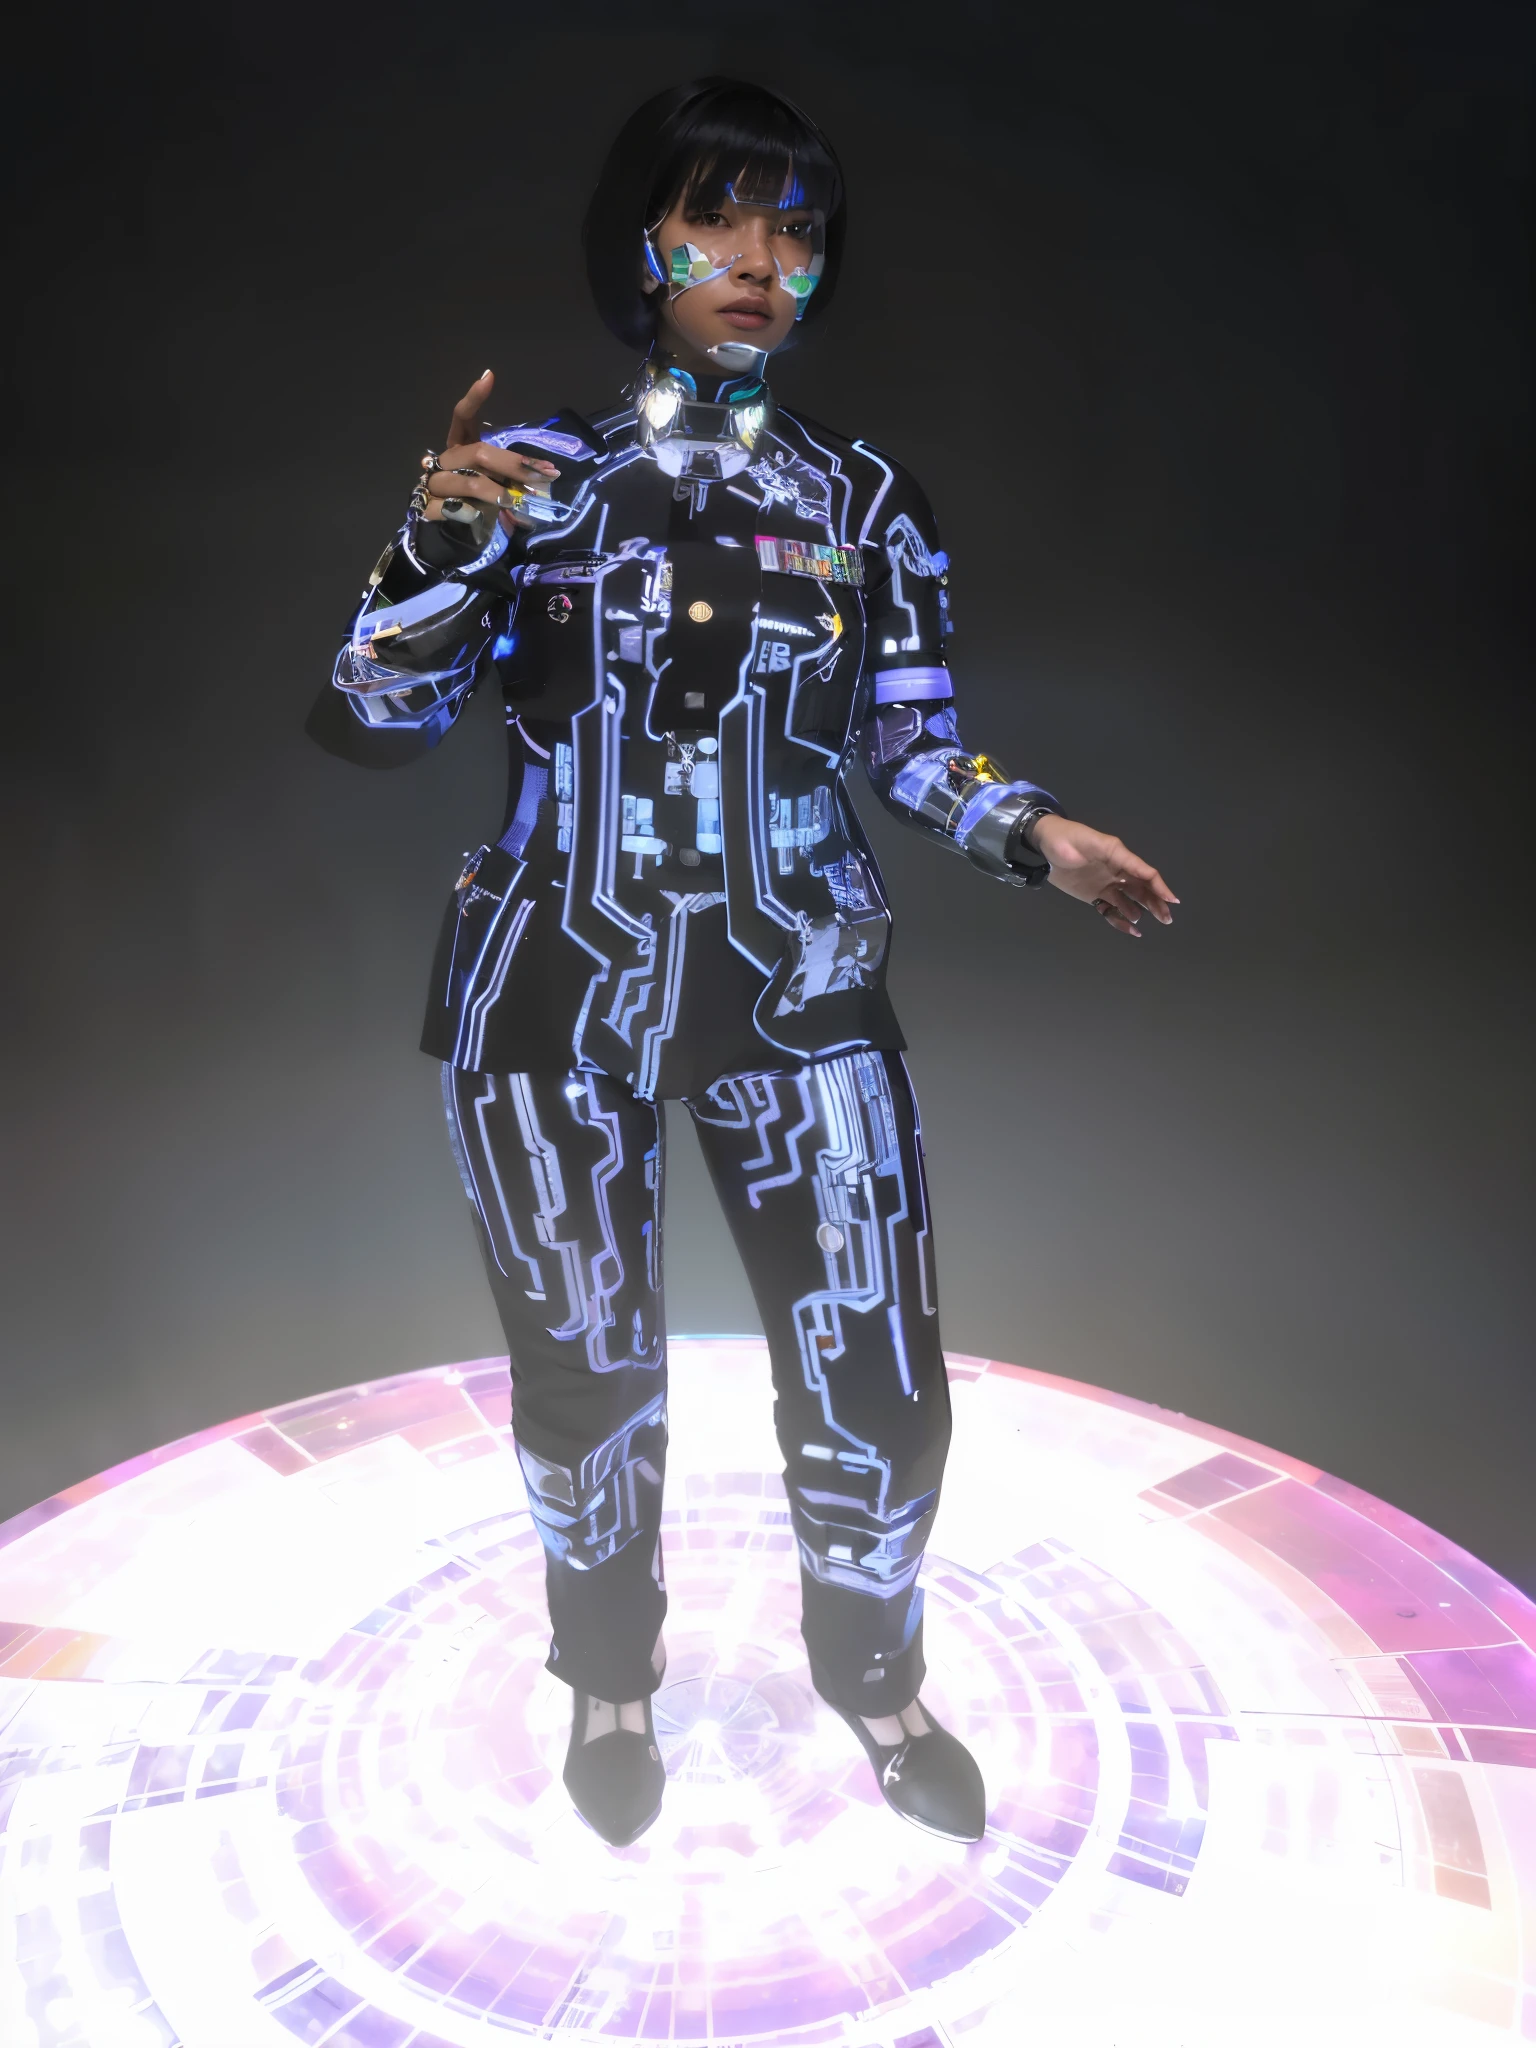 arafed woman in a futuristic officer suit standing on a circular surface, holographic officer, (hyper realistic artificial female officer), cyber suit, cyborg naval officer, military holograms, cyberpunk suit, science fiction suit, cyber avatar, photo realistic hologram, sci - fi suit, fashionable female naval officer, artificial intelligence naval officer, lecturing hologram, diverse cybersuits